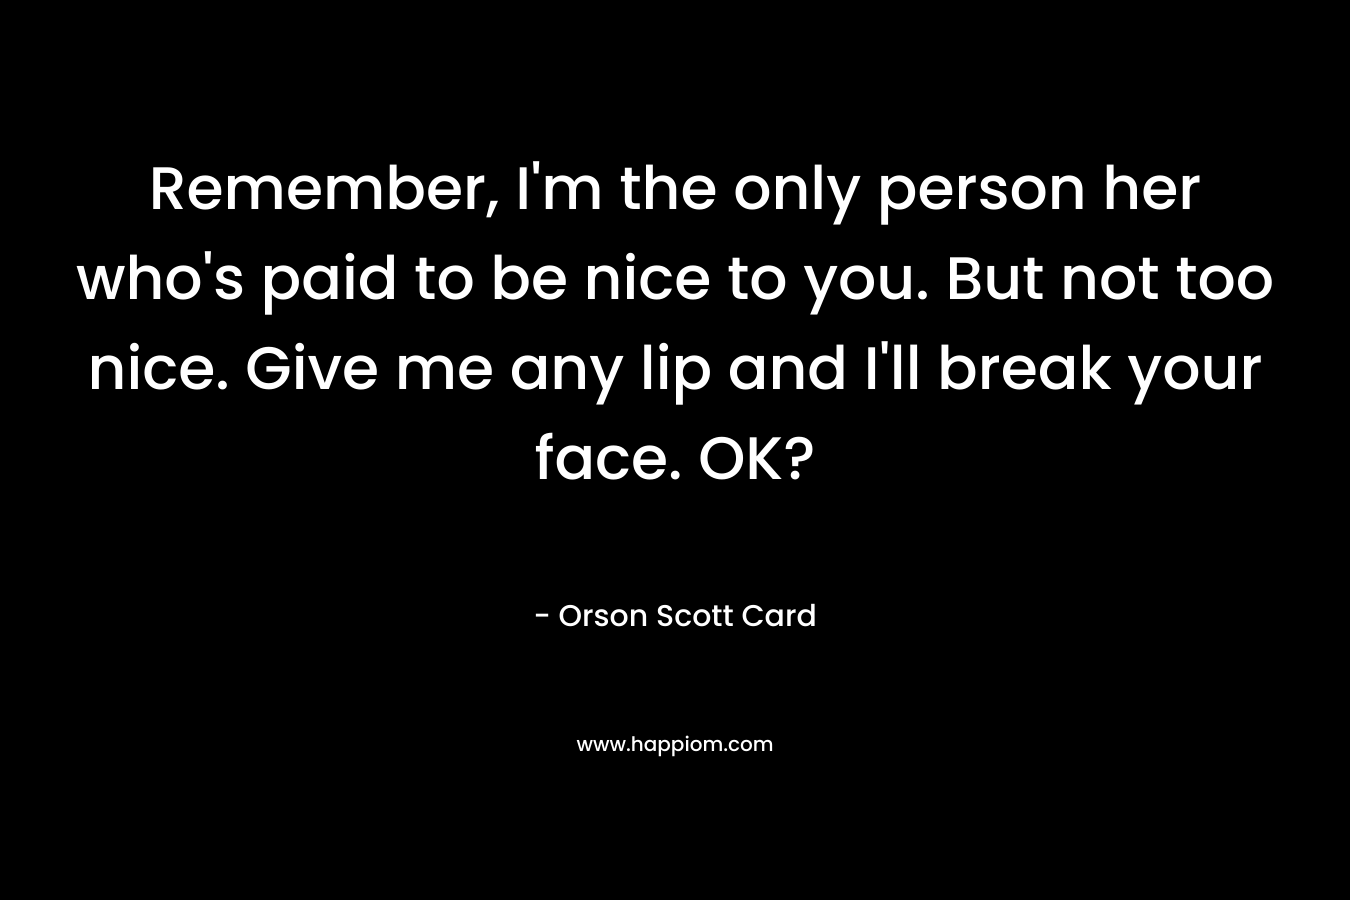 Remember, I'm the only person her who's paid to be nice to you. But not too nice. Give me any lip and I'll break your face. OK?